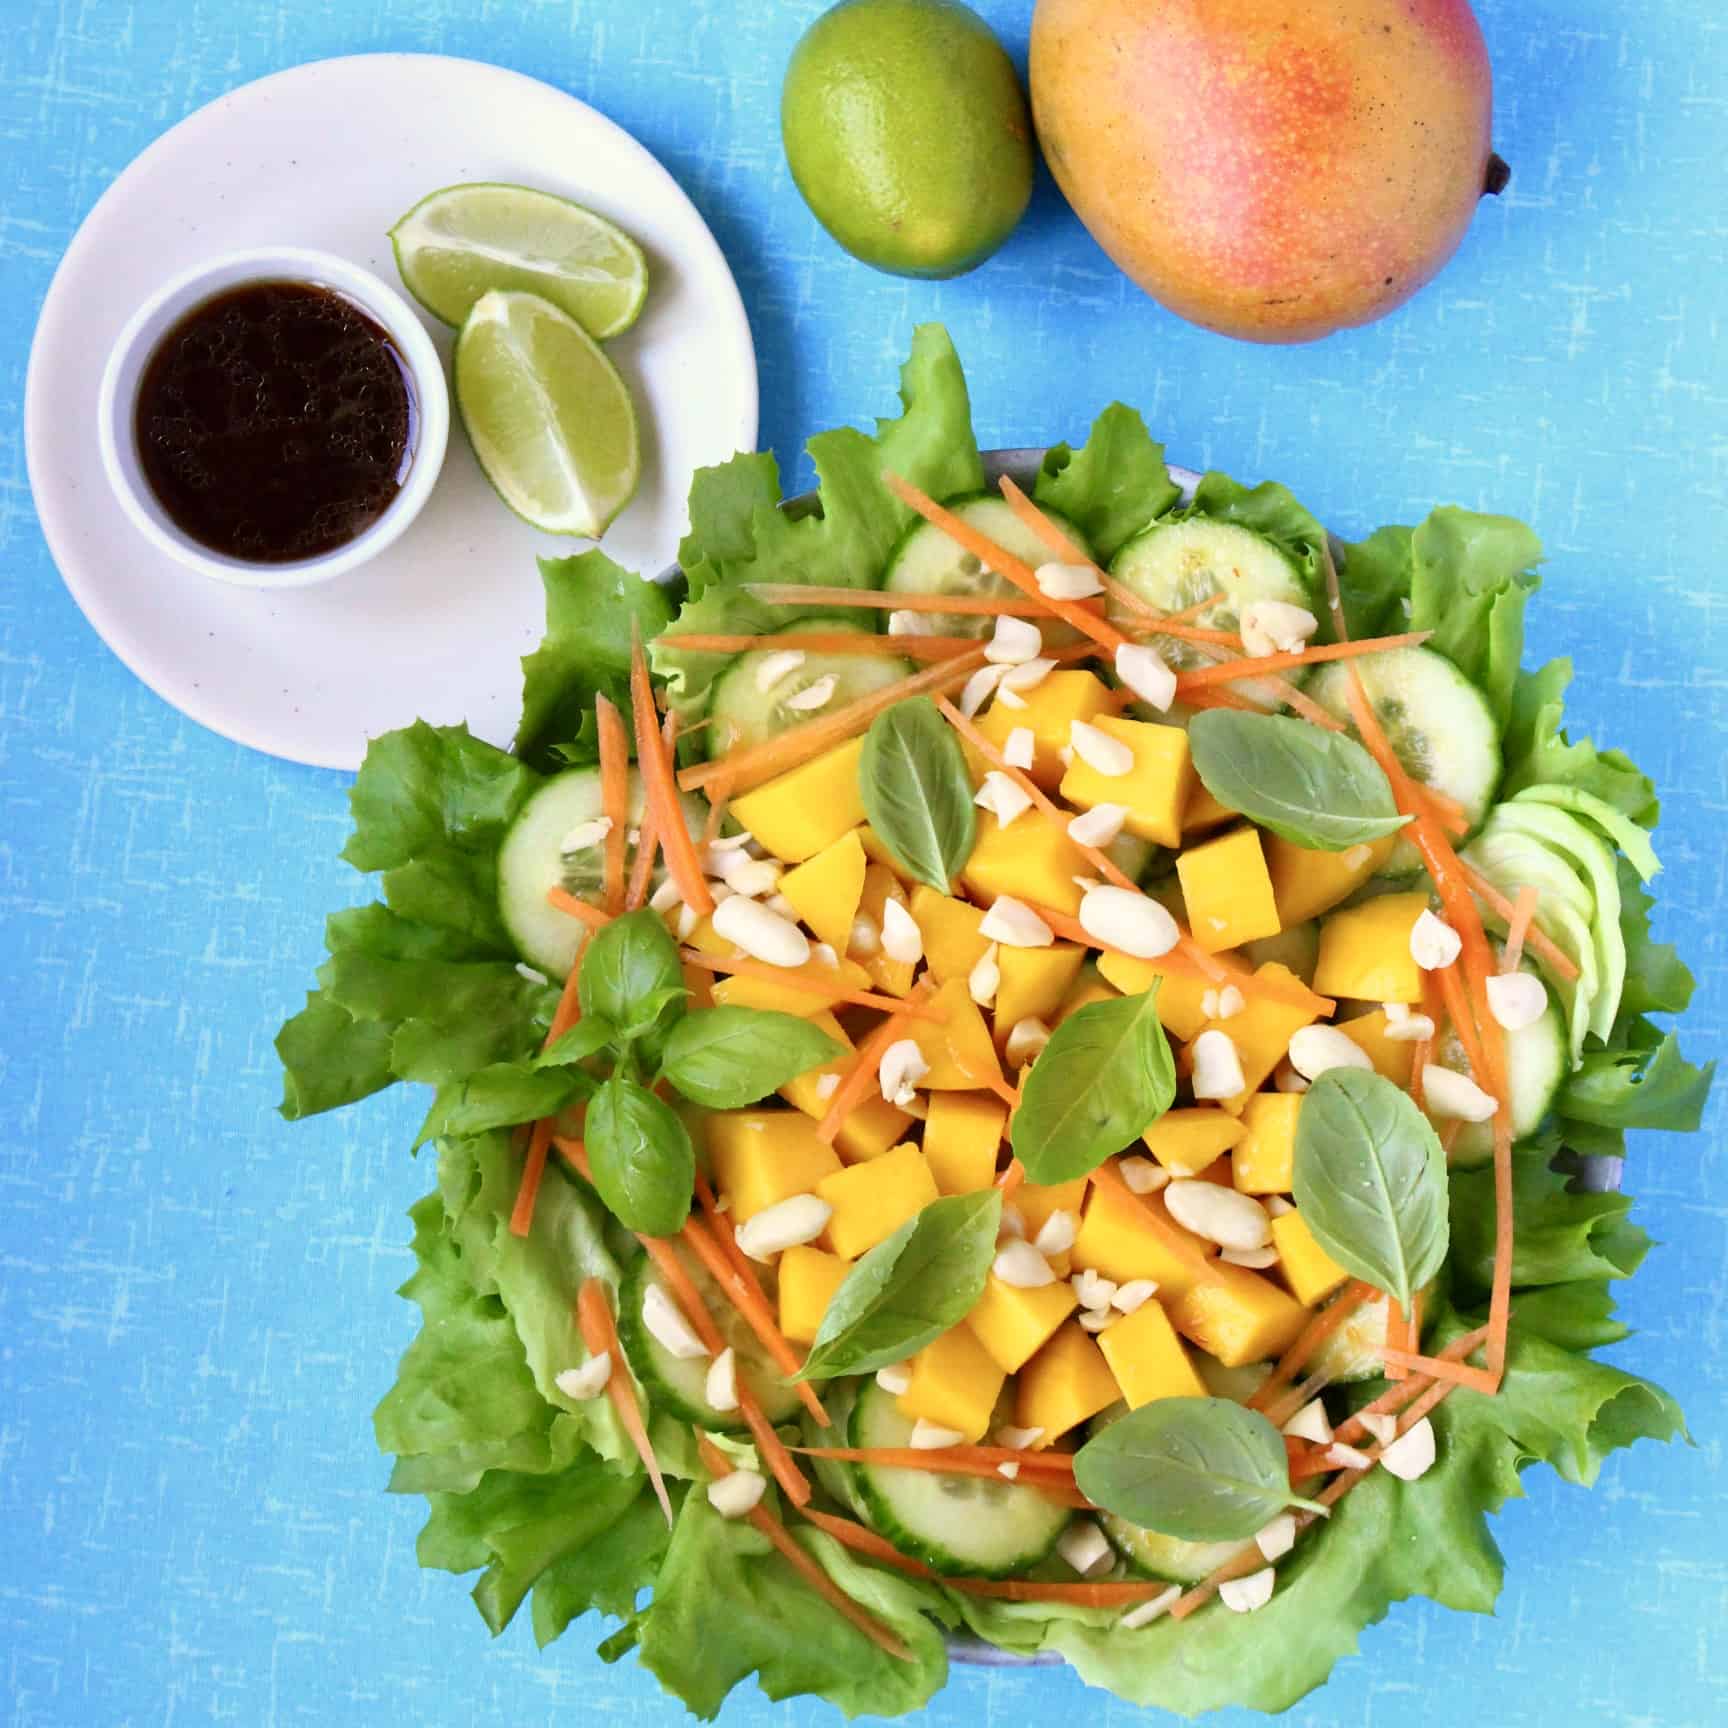 Mango salad with peanuts, cucumber, lettuce, carrots and basil 